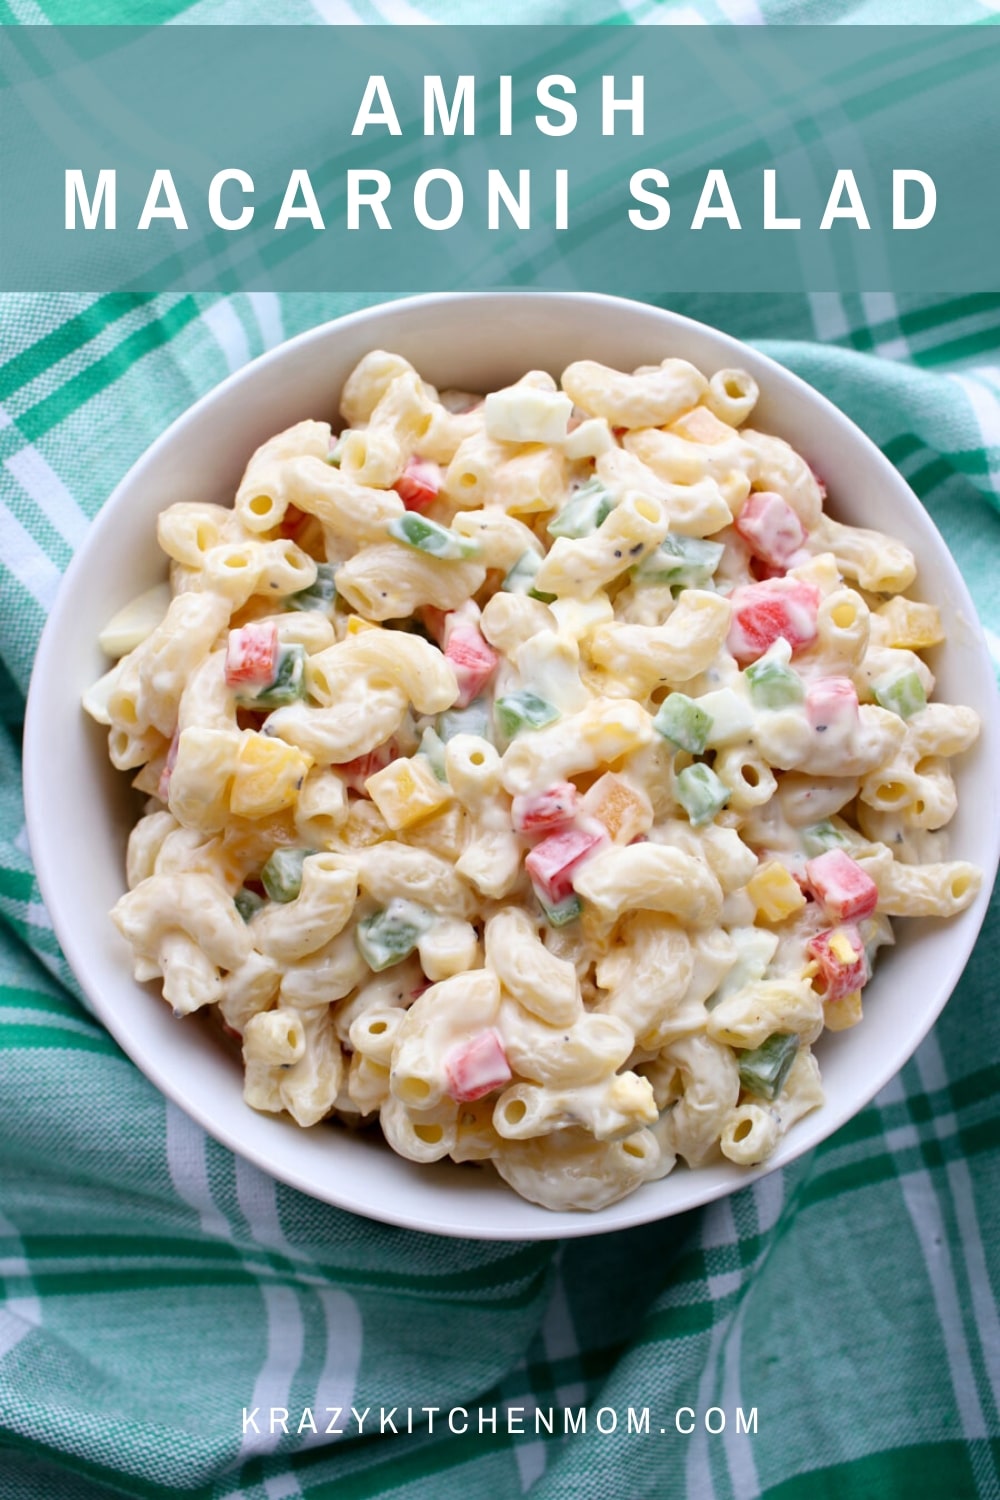 Sweet Tangy Amish Macaroni Salad is a classic summer side dish. It's full of fresh bell peppers, celery, and hard-boiled eggs. via @krazykitchenmom